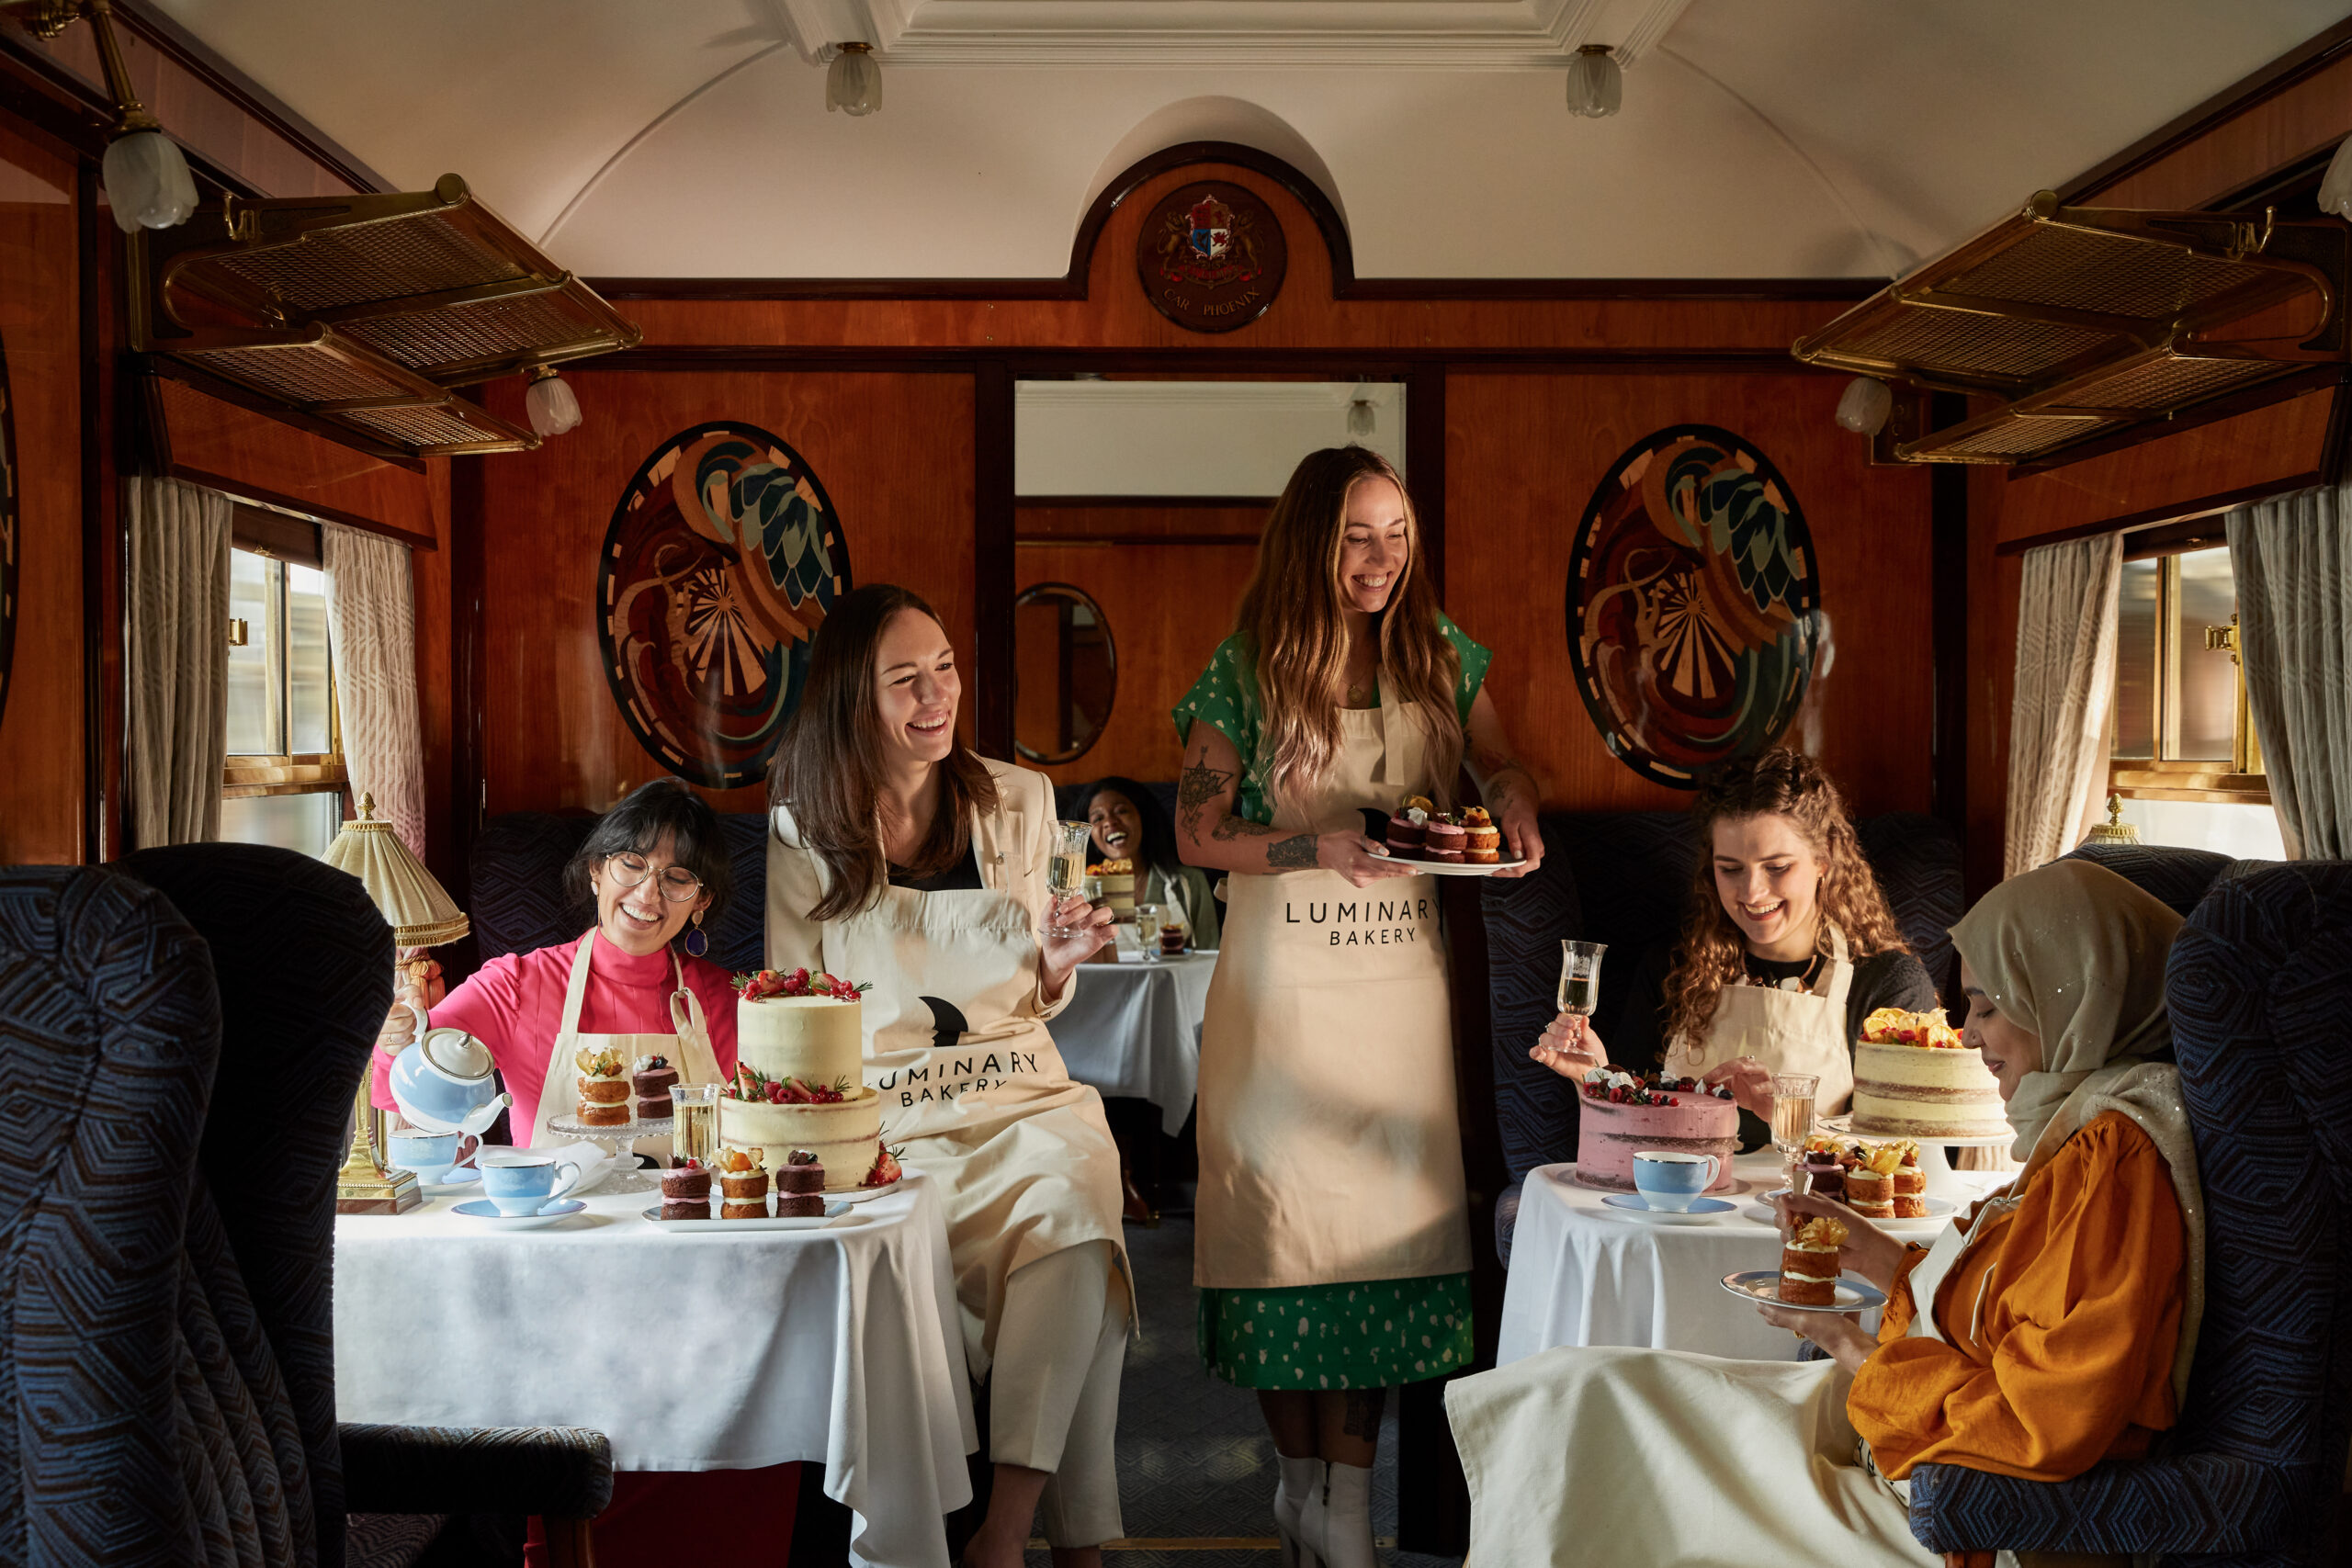 Belmond introduces a new 'golden era' for the British Pullman with